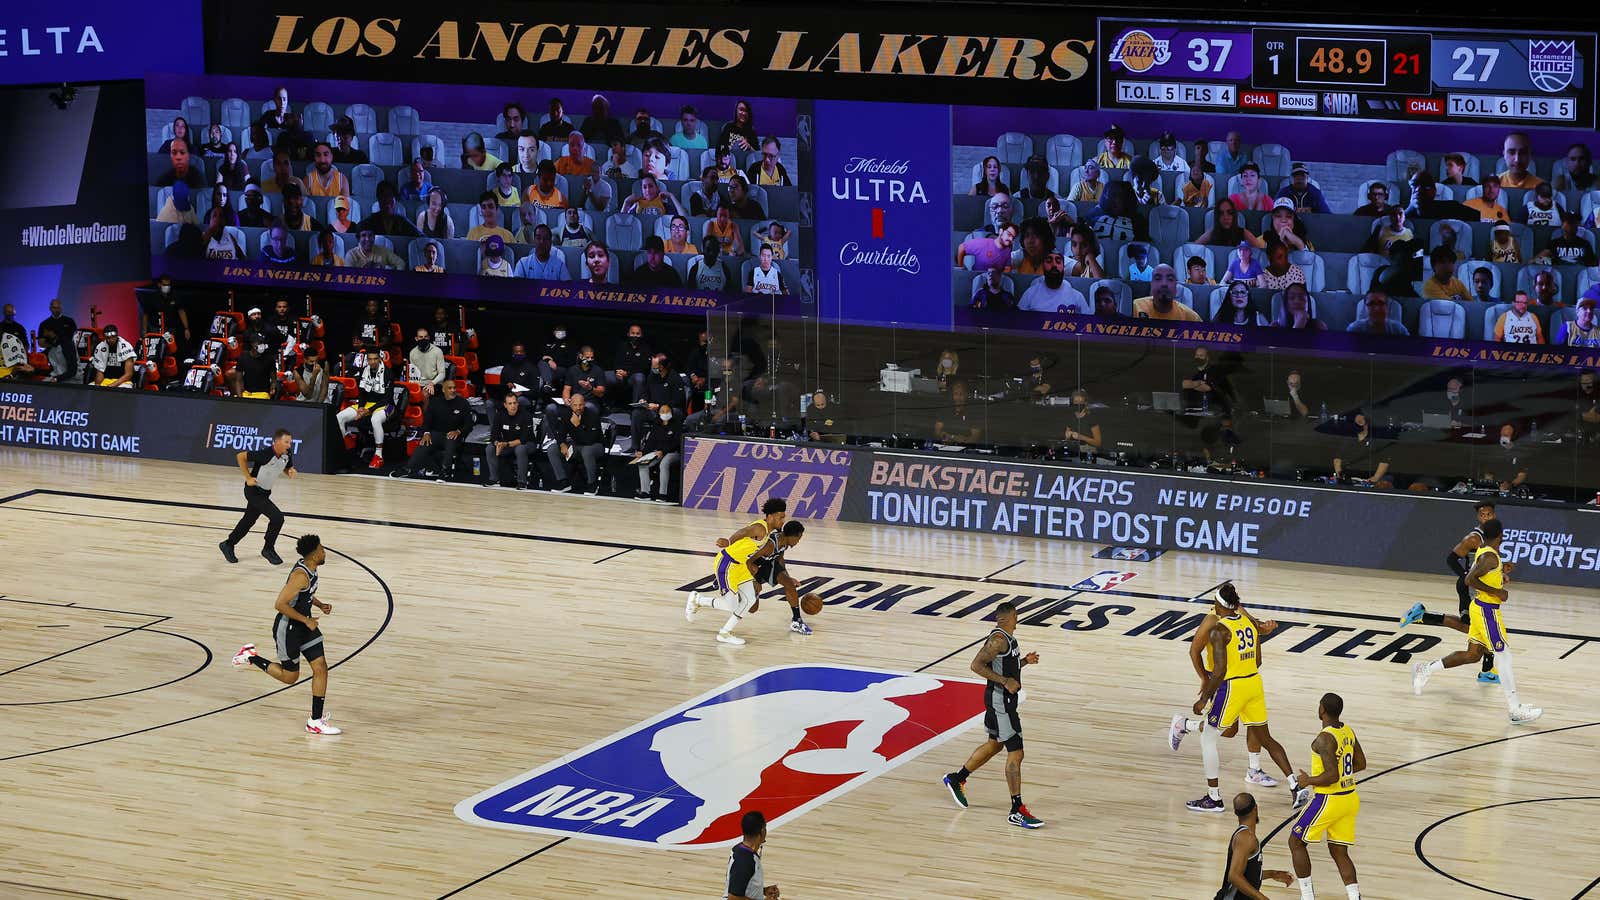 This is what a Lakers “home” game looks like now.